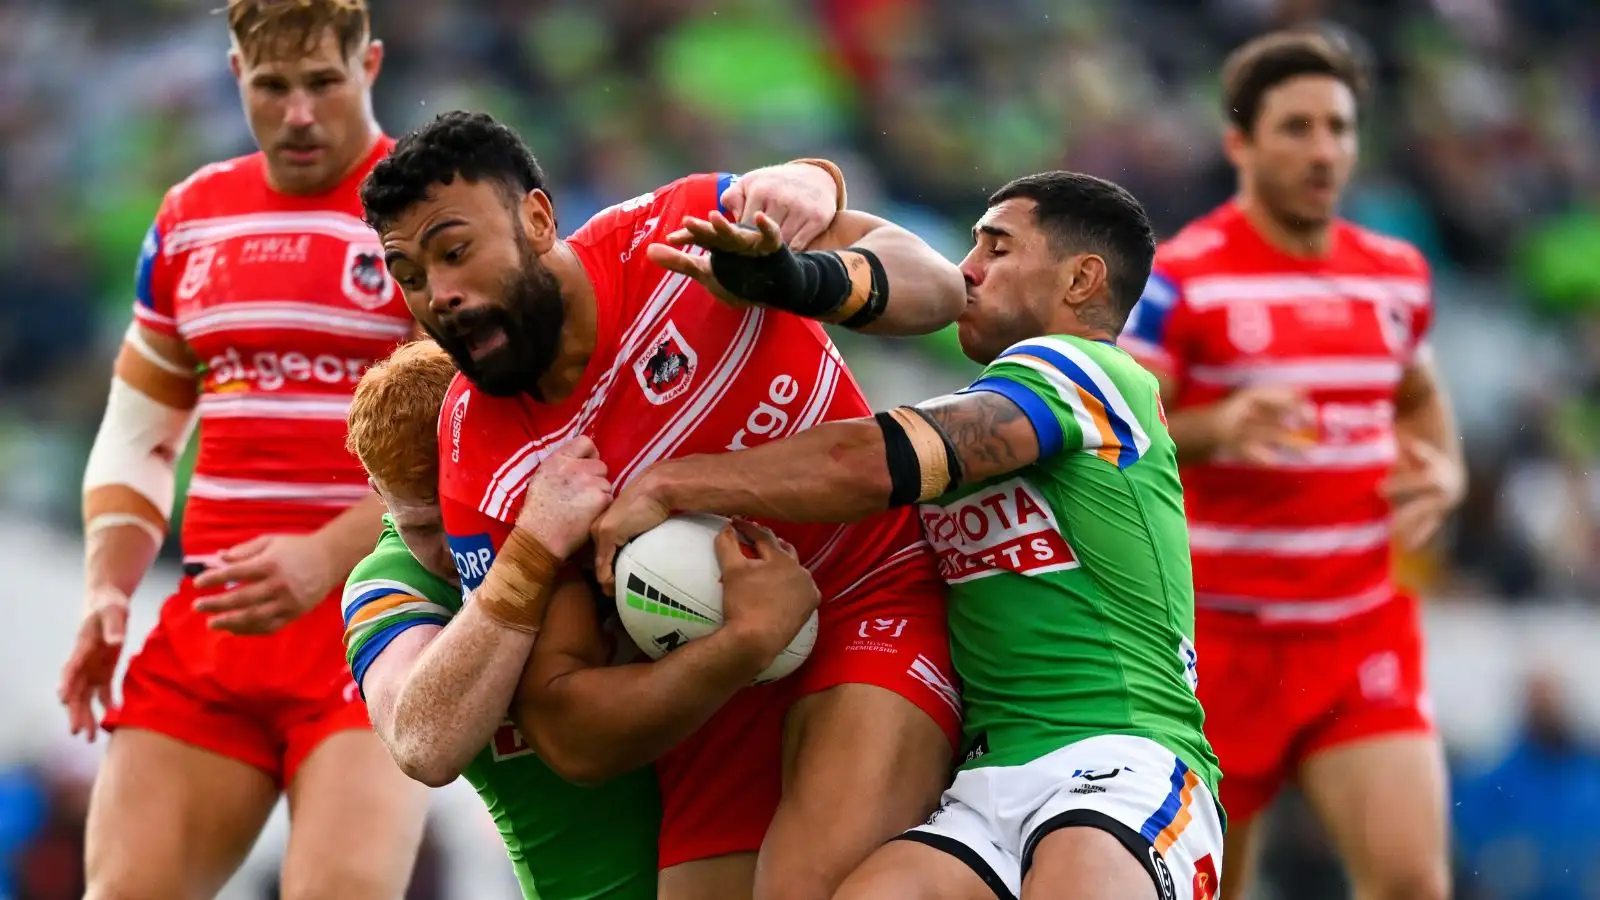 St George Illawarra Dragons release international forward, previous links with Super League move